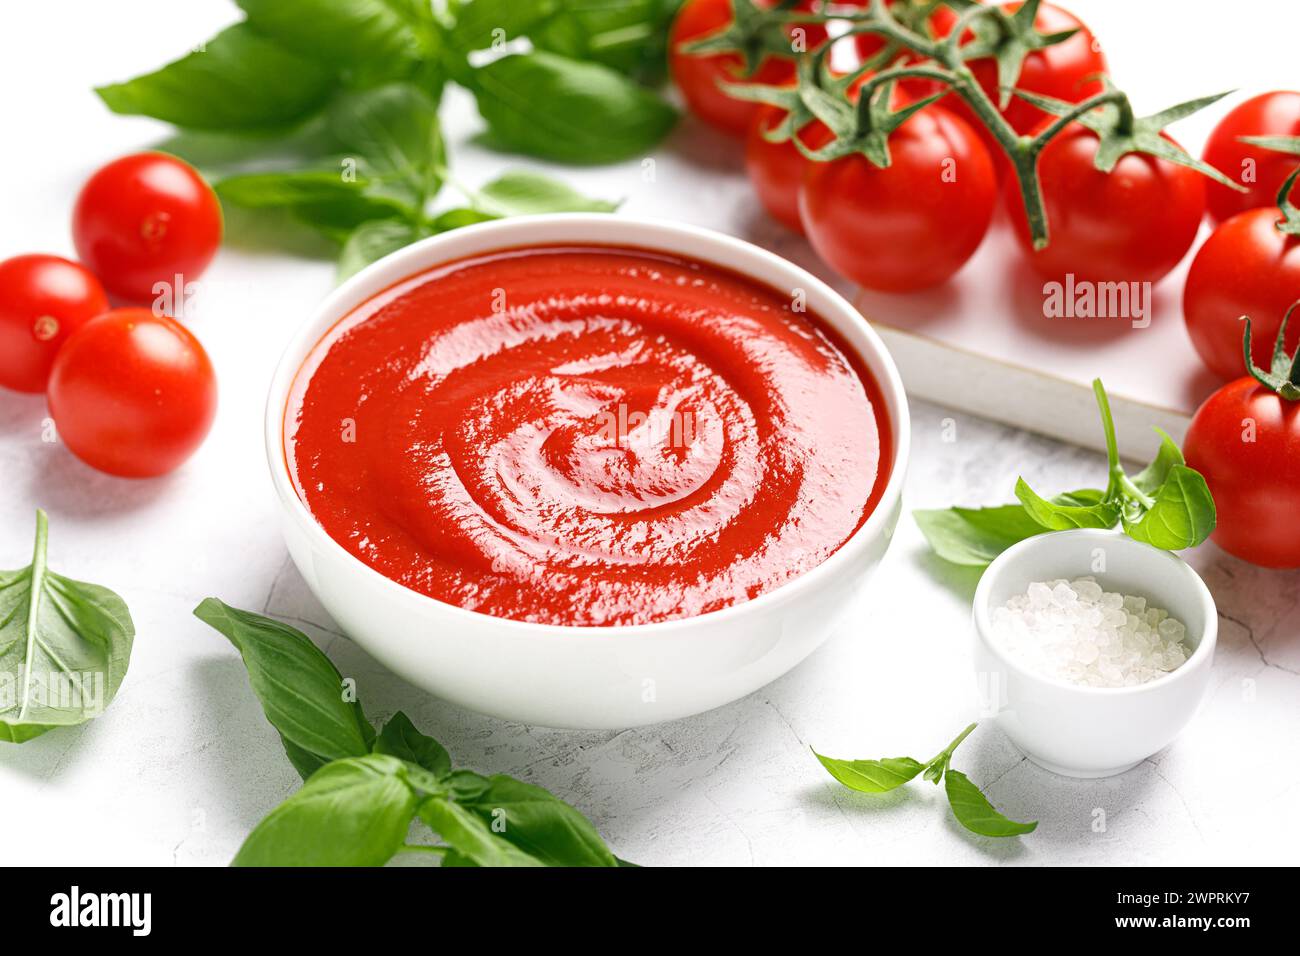 Tomato paste, sauce, ketchup and cherry tomatoes on branches and basil with copy space on white background Stock Photo